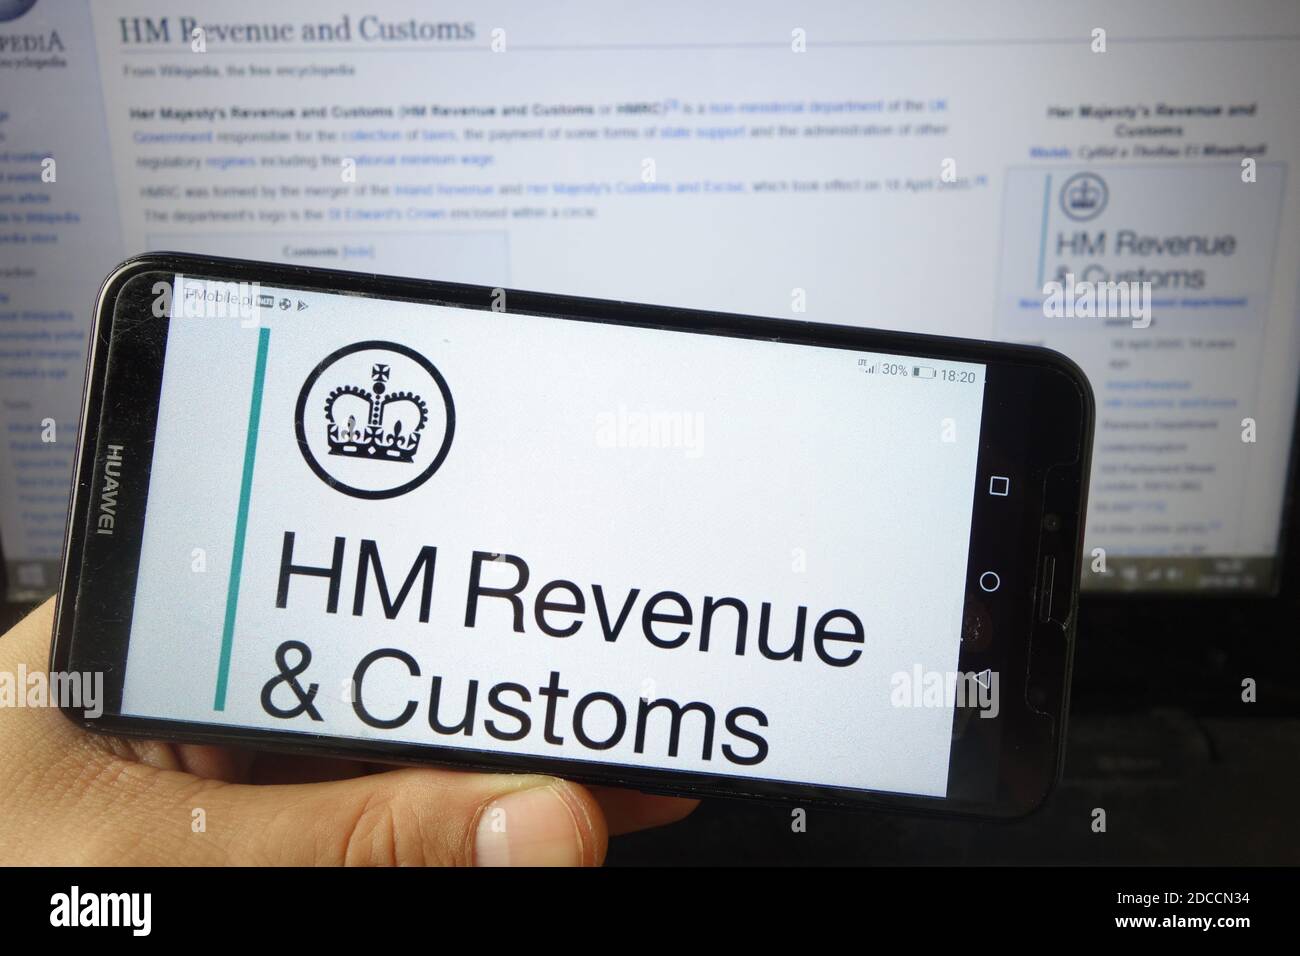 KONSKIE, POLAND - August 18, 2019: HM Revenue and Customs logo displayed on mobile phone Stock Photo